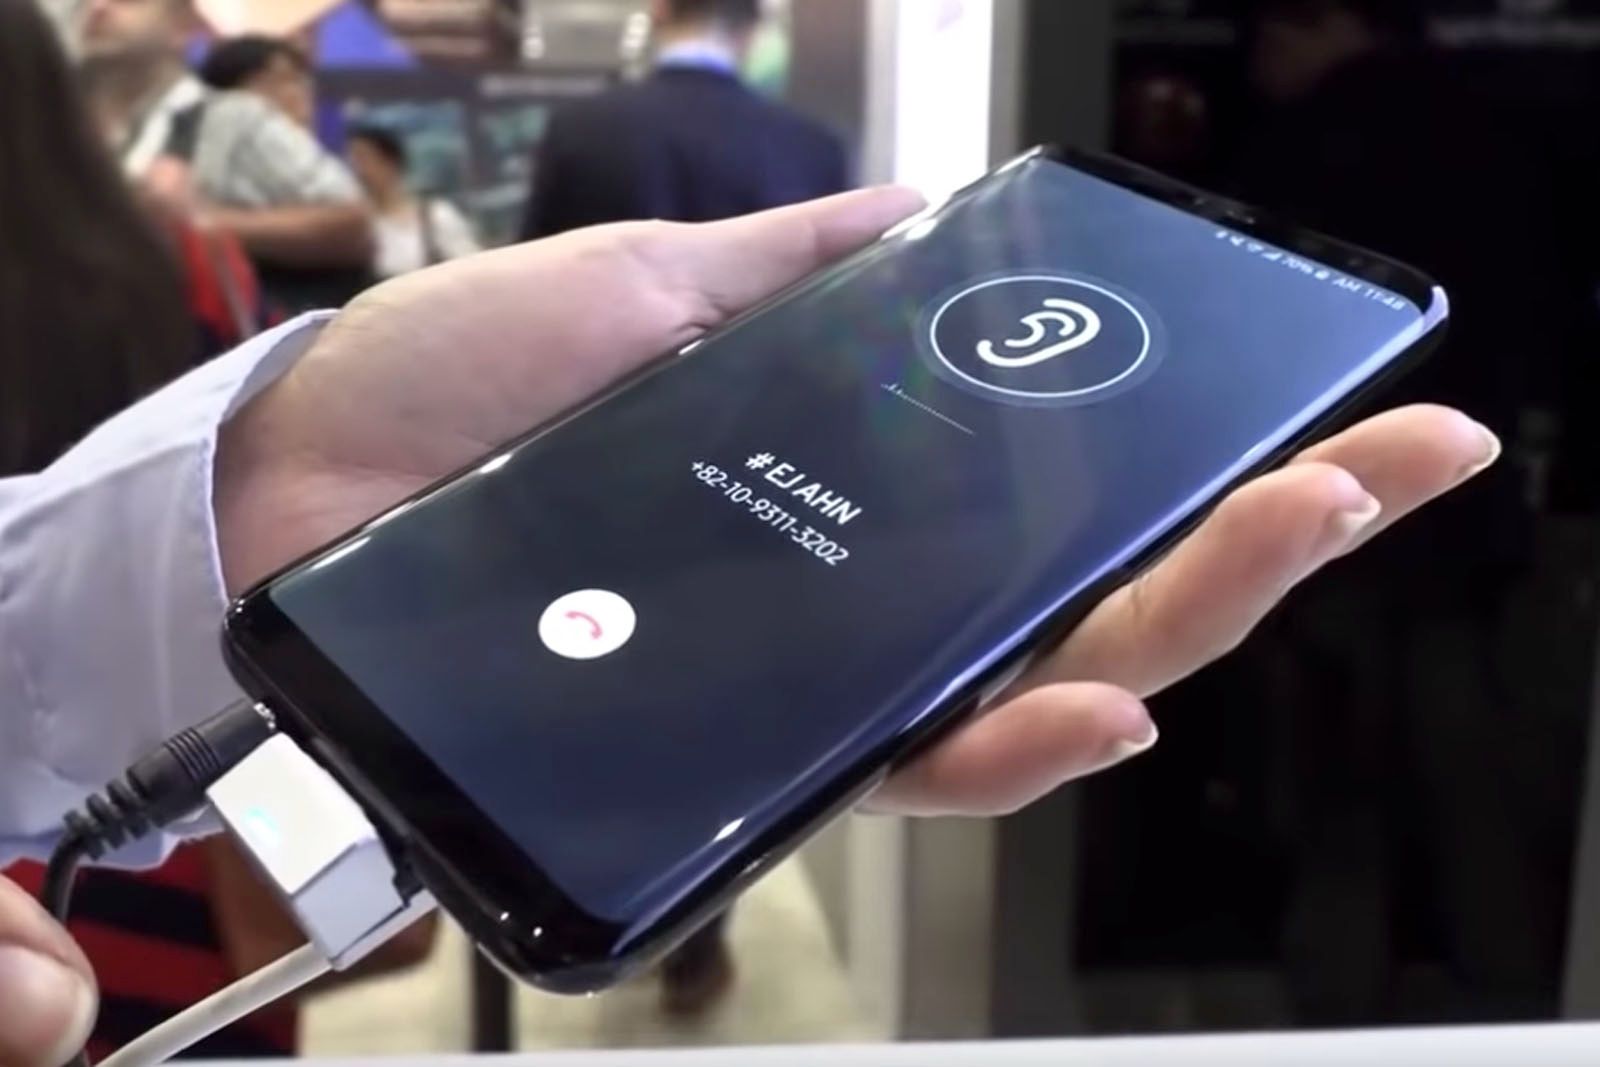 Speakers under the display could be a big trend in 2019 smartphones image 1